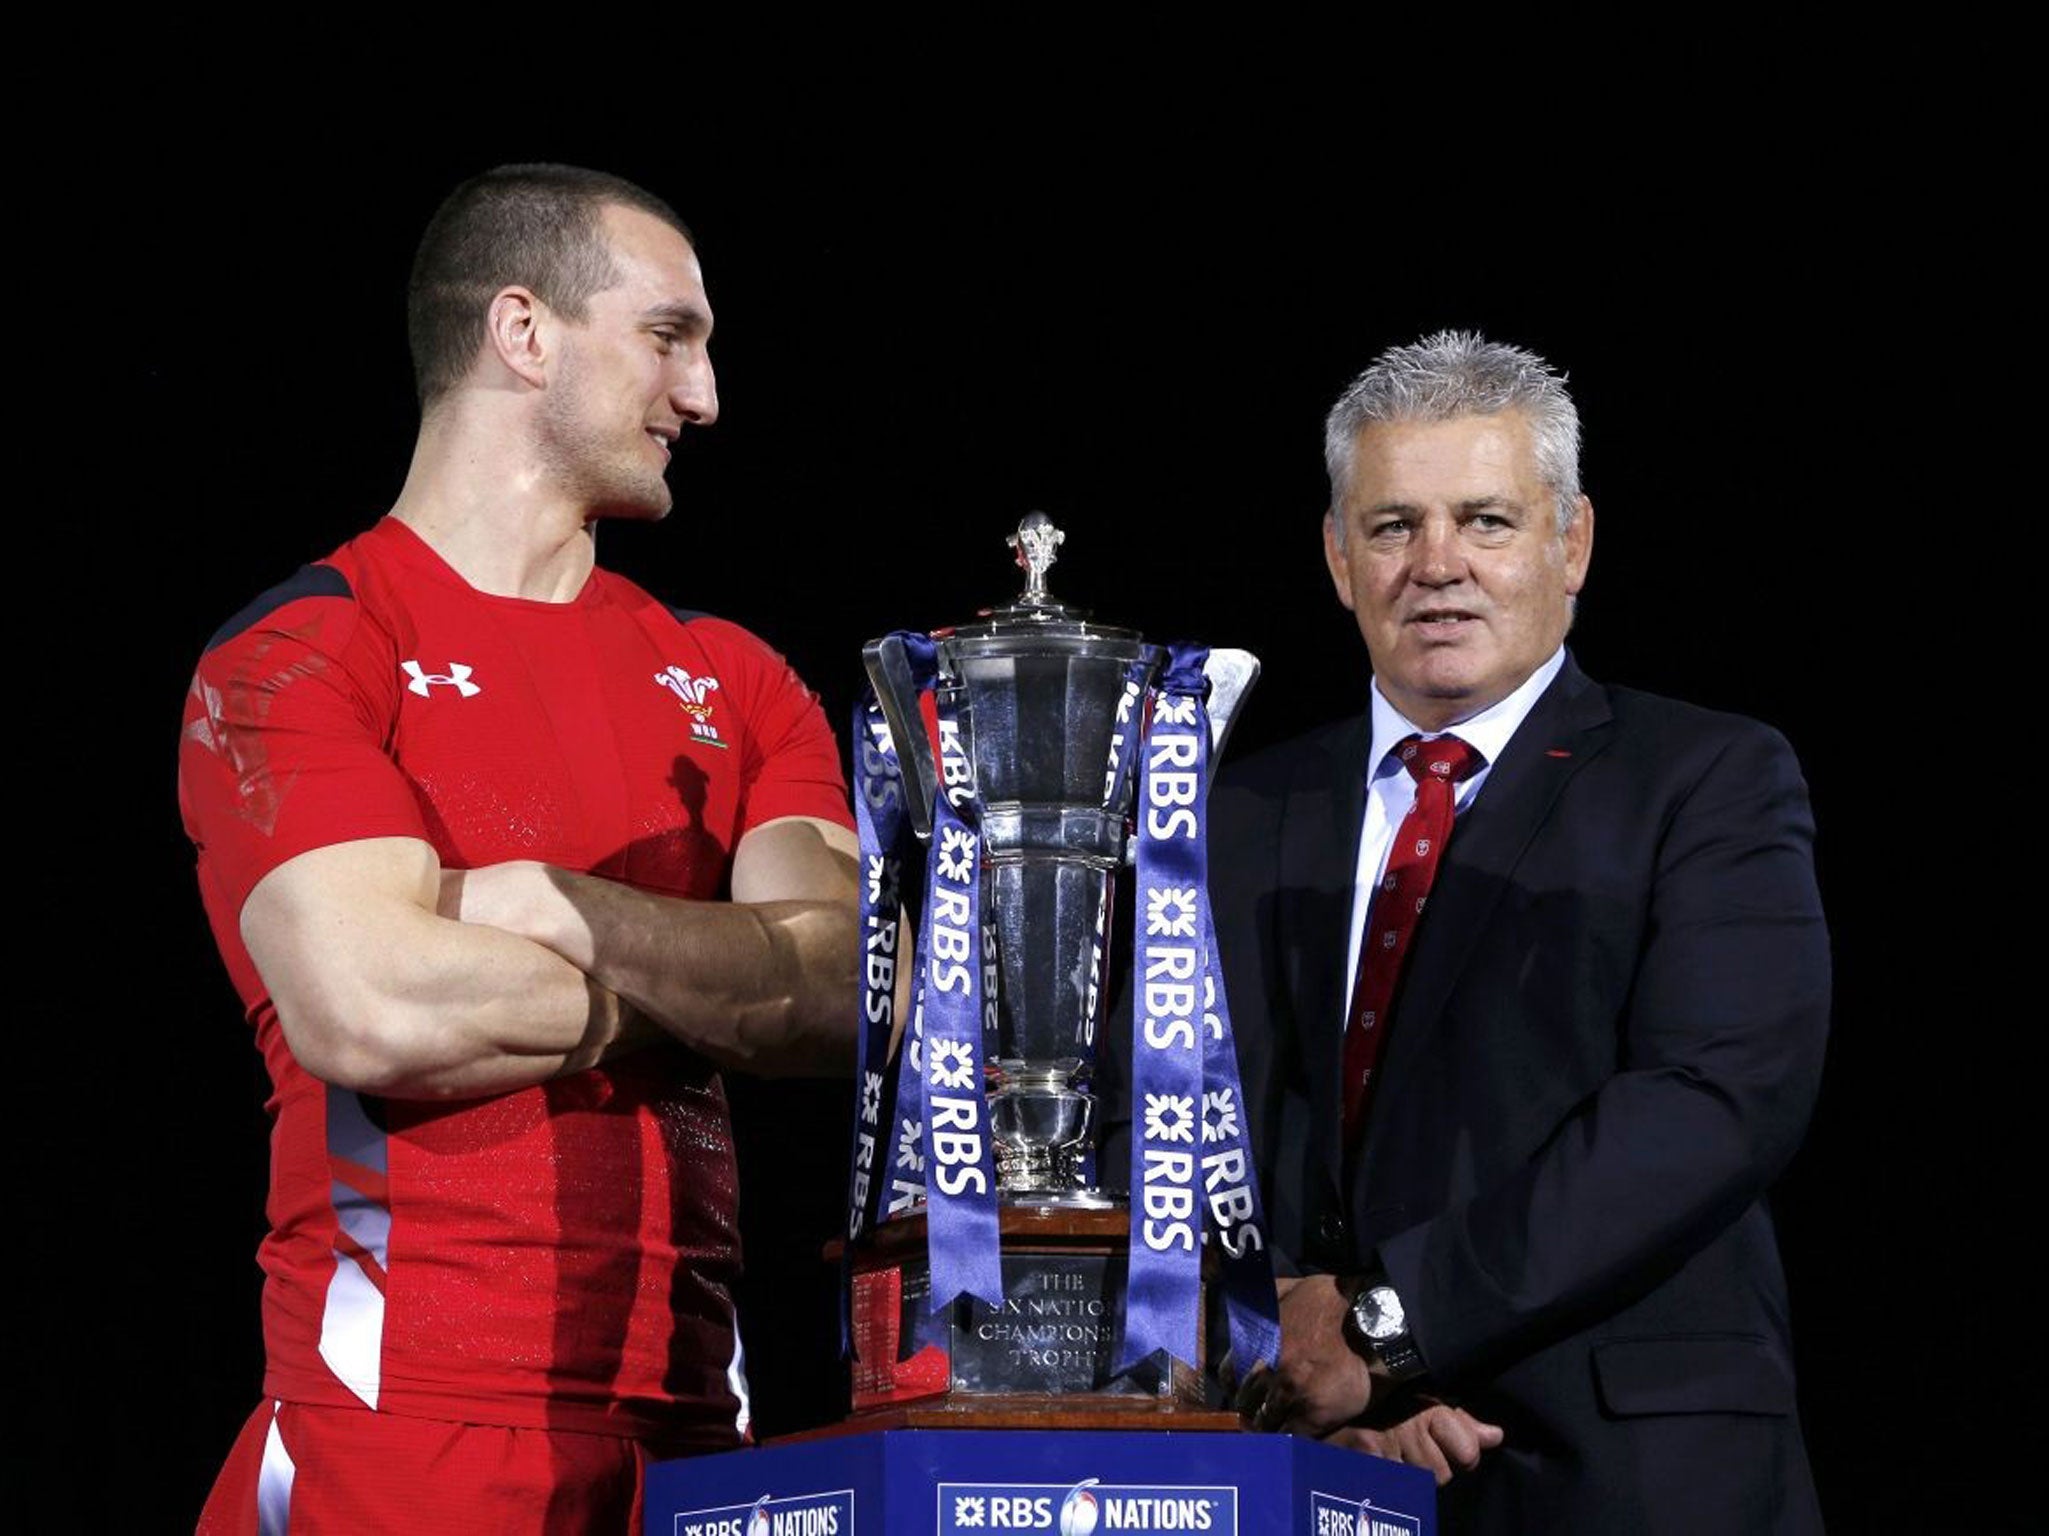 Play it again Sam: Warren Gatland has established a special bond with skipper Warburton for both Wales and the Lions